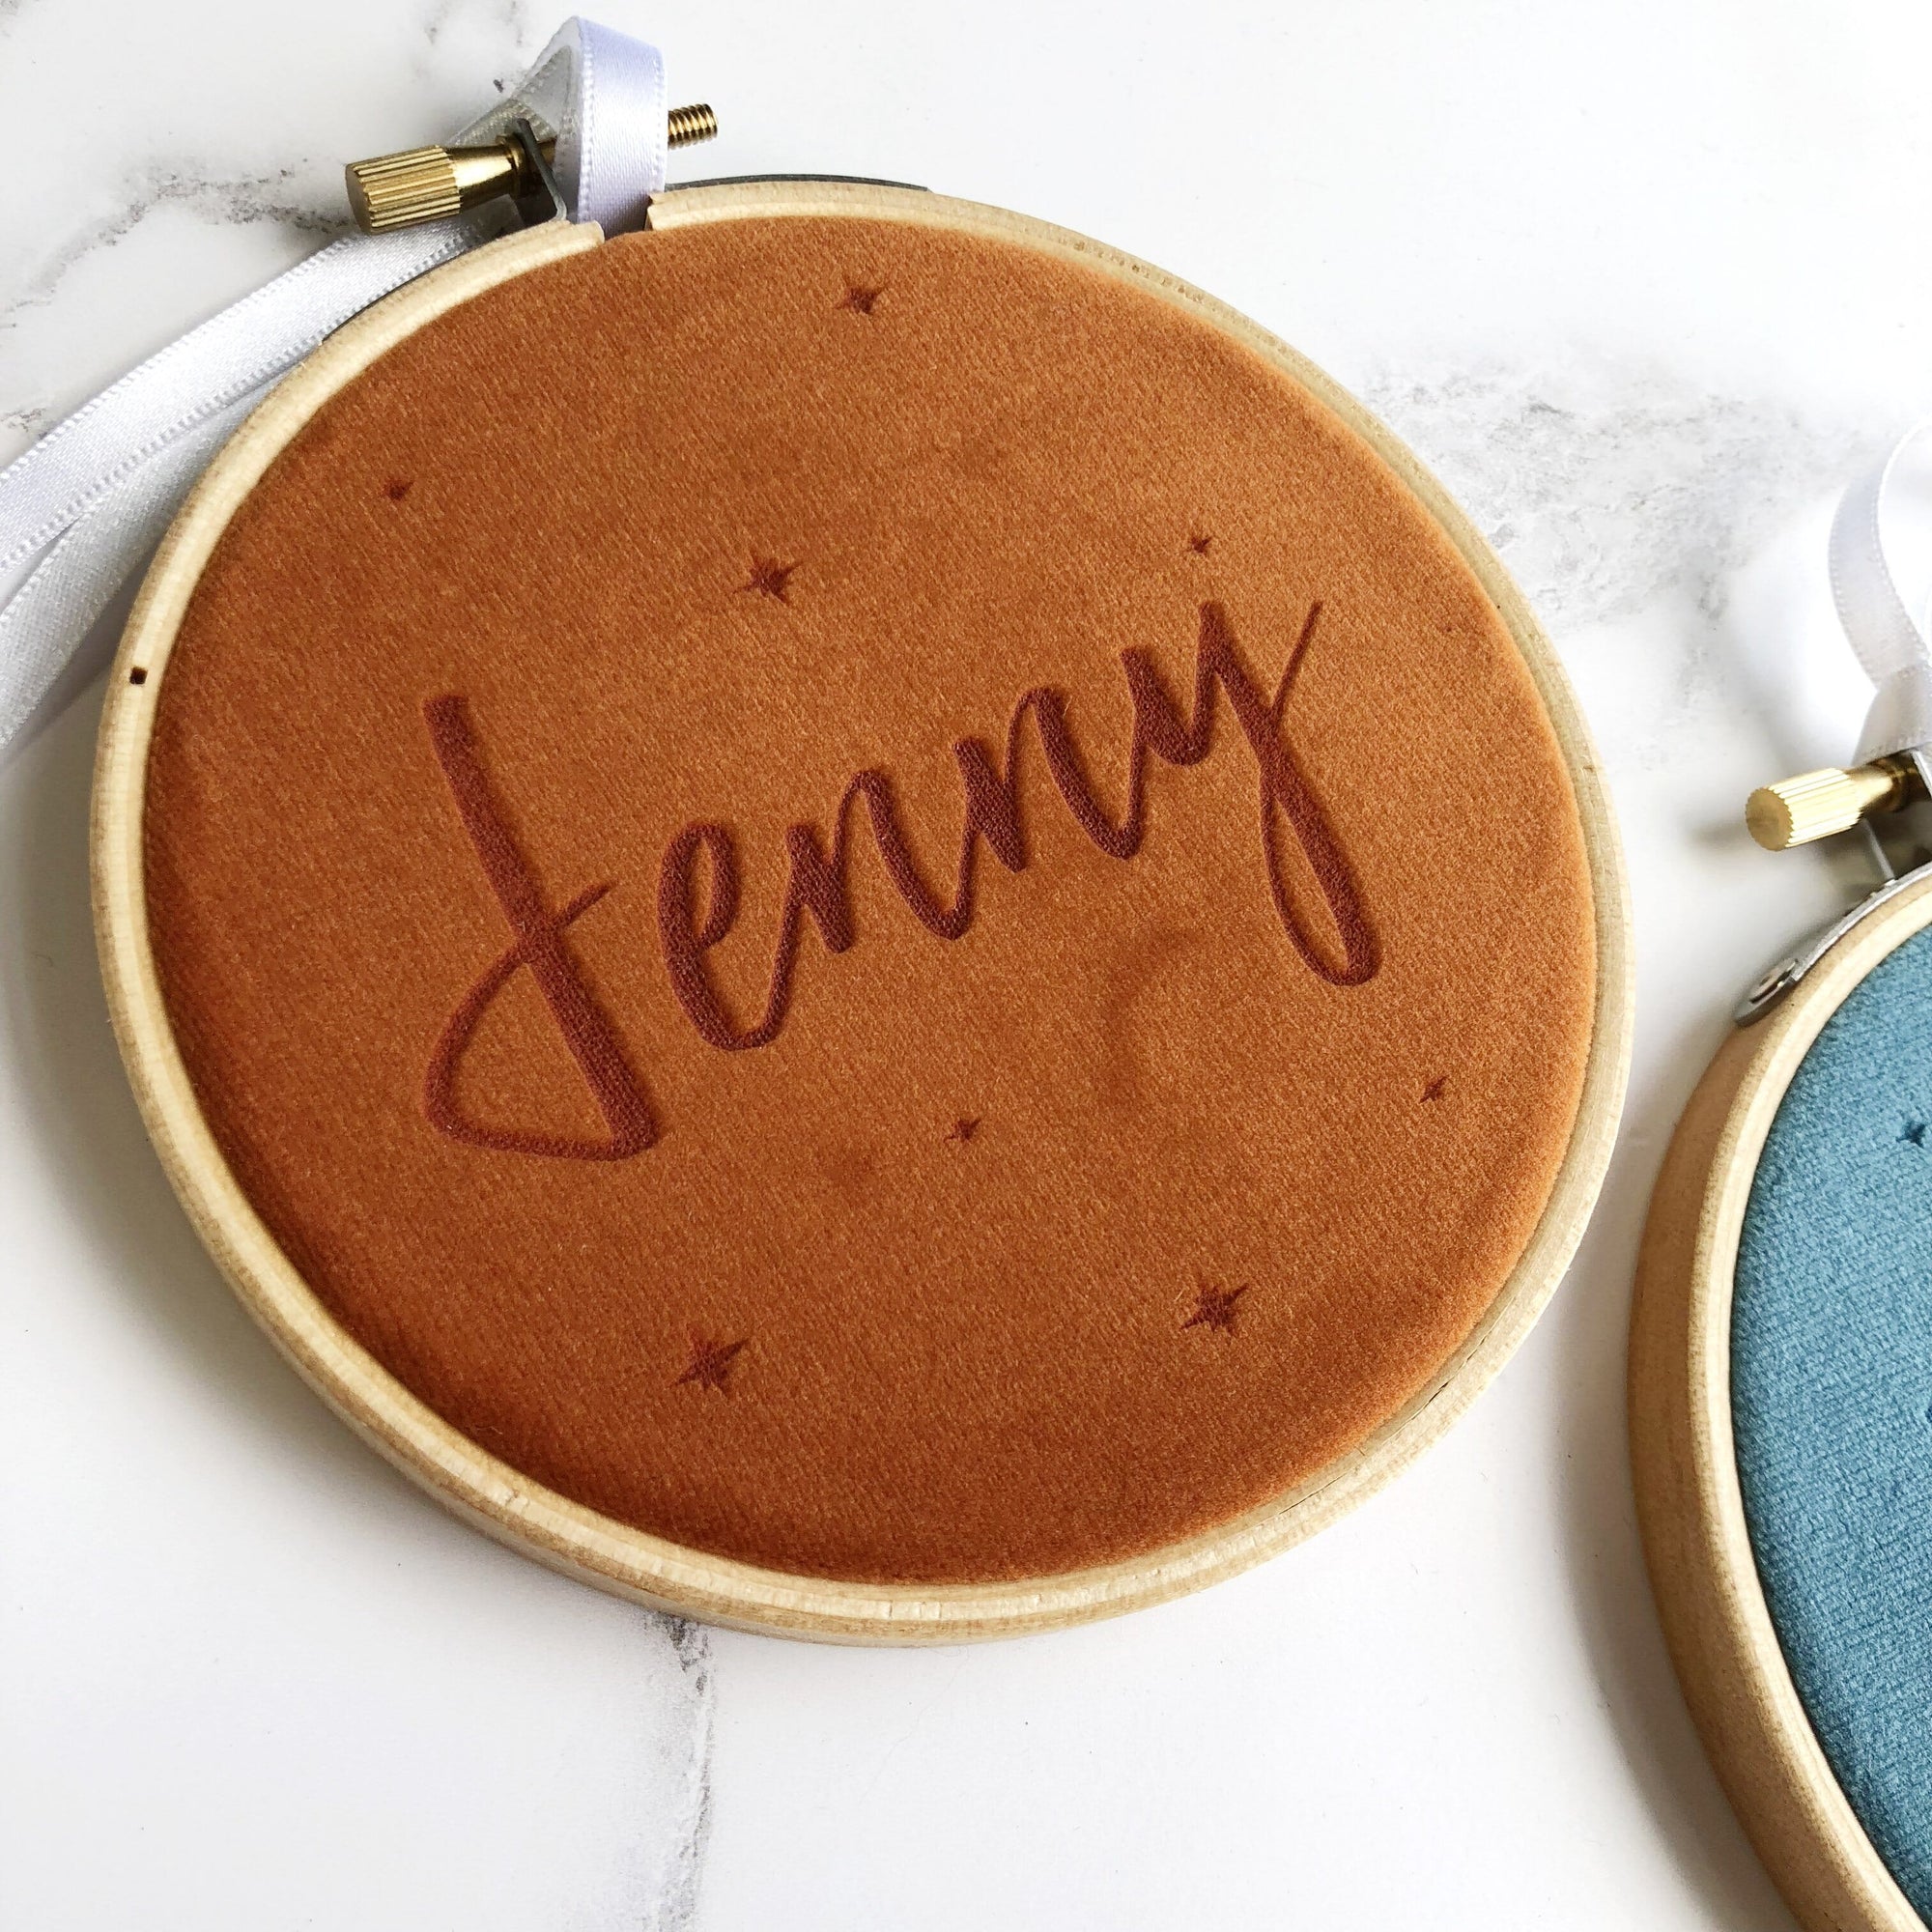 Velvet in an embroidery hoop engraved with a name